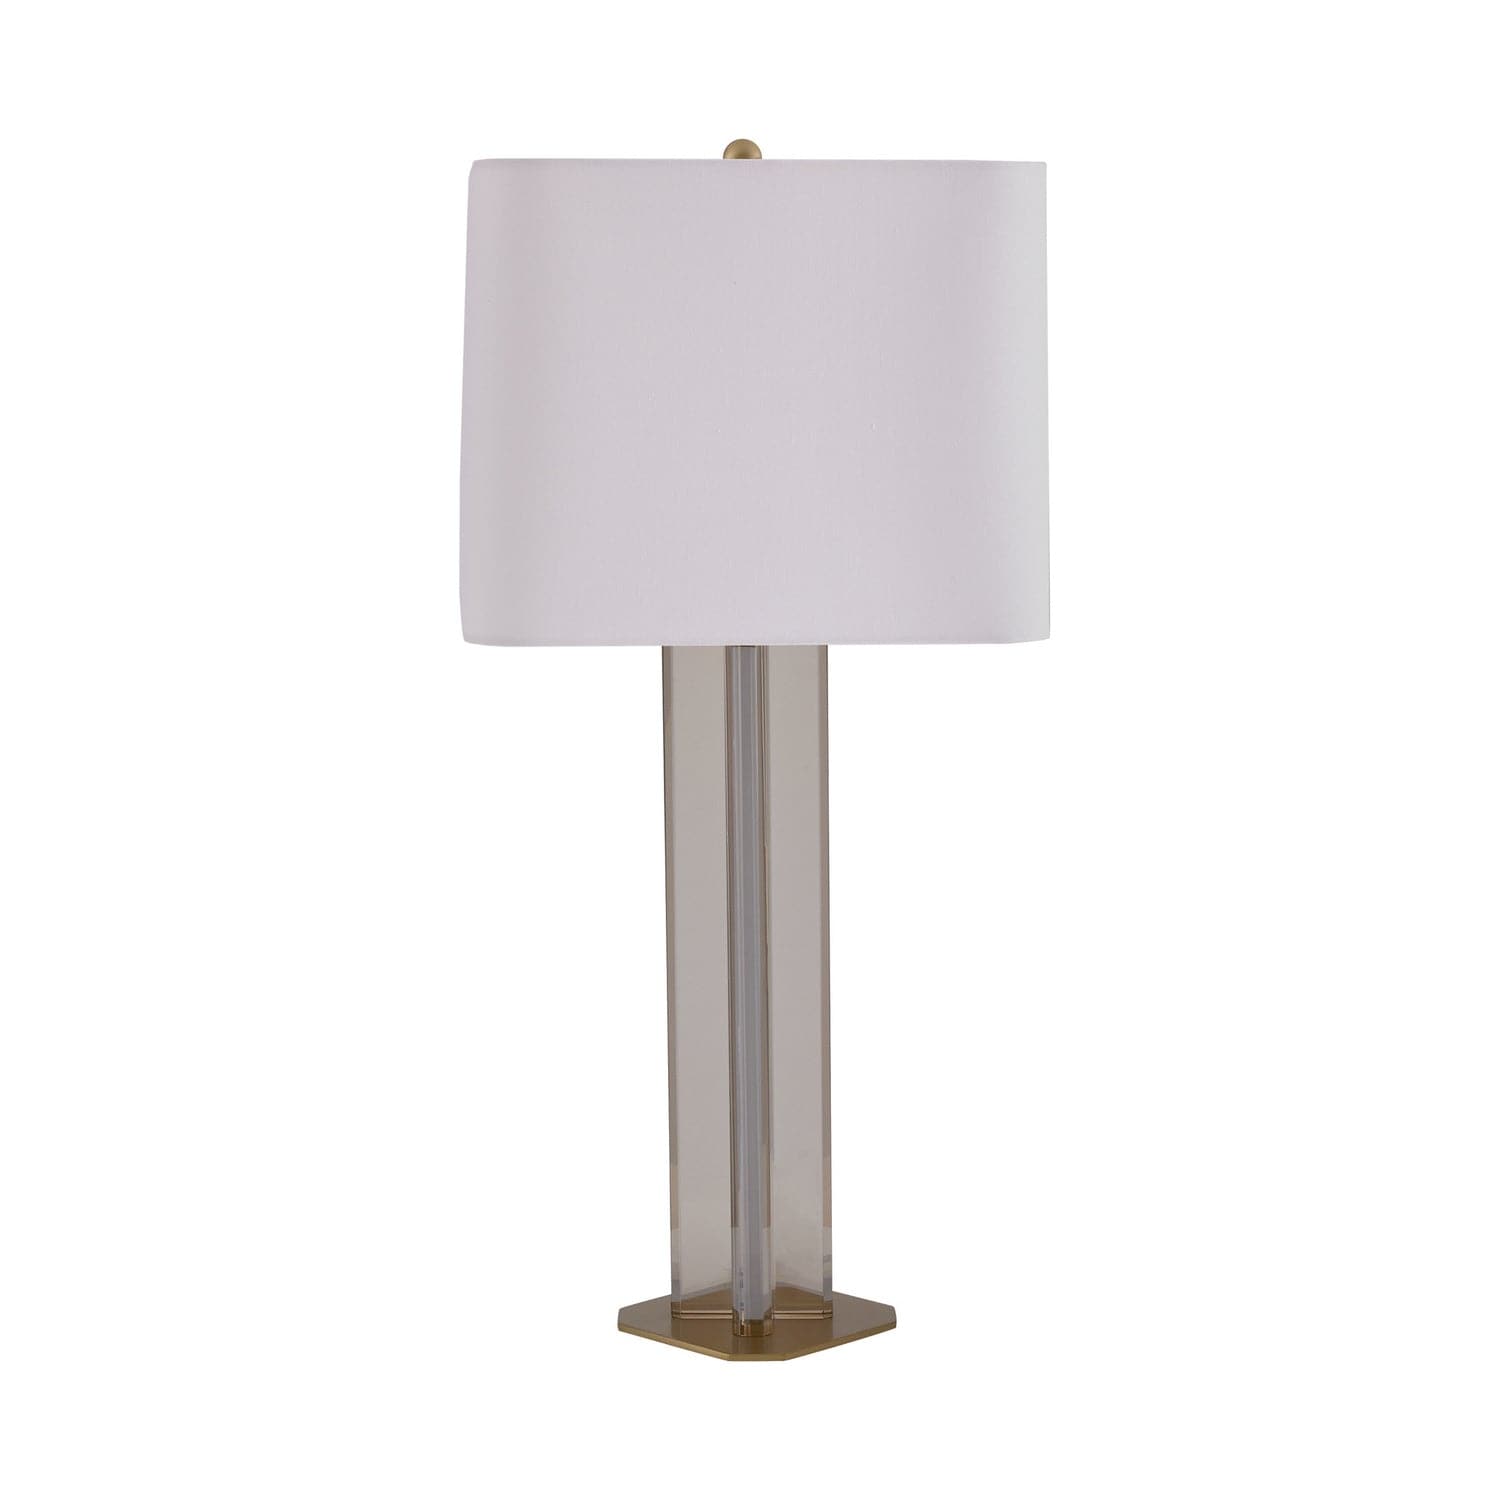 Arteriors - 49774-619 - One Light Table Lamp - Malabo - Champagne